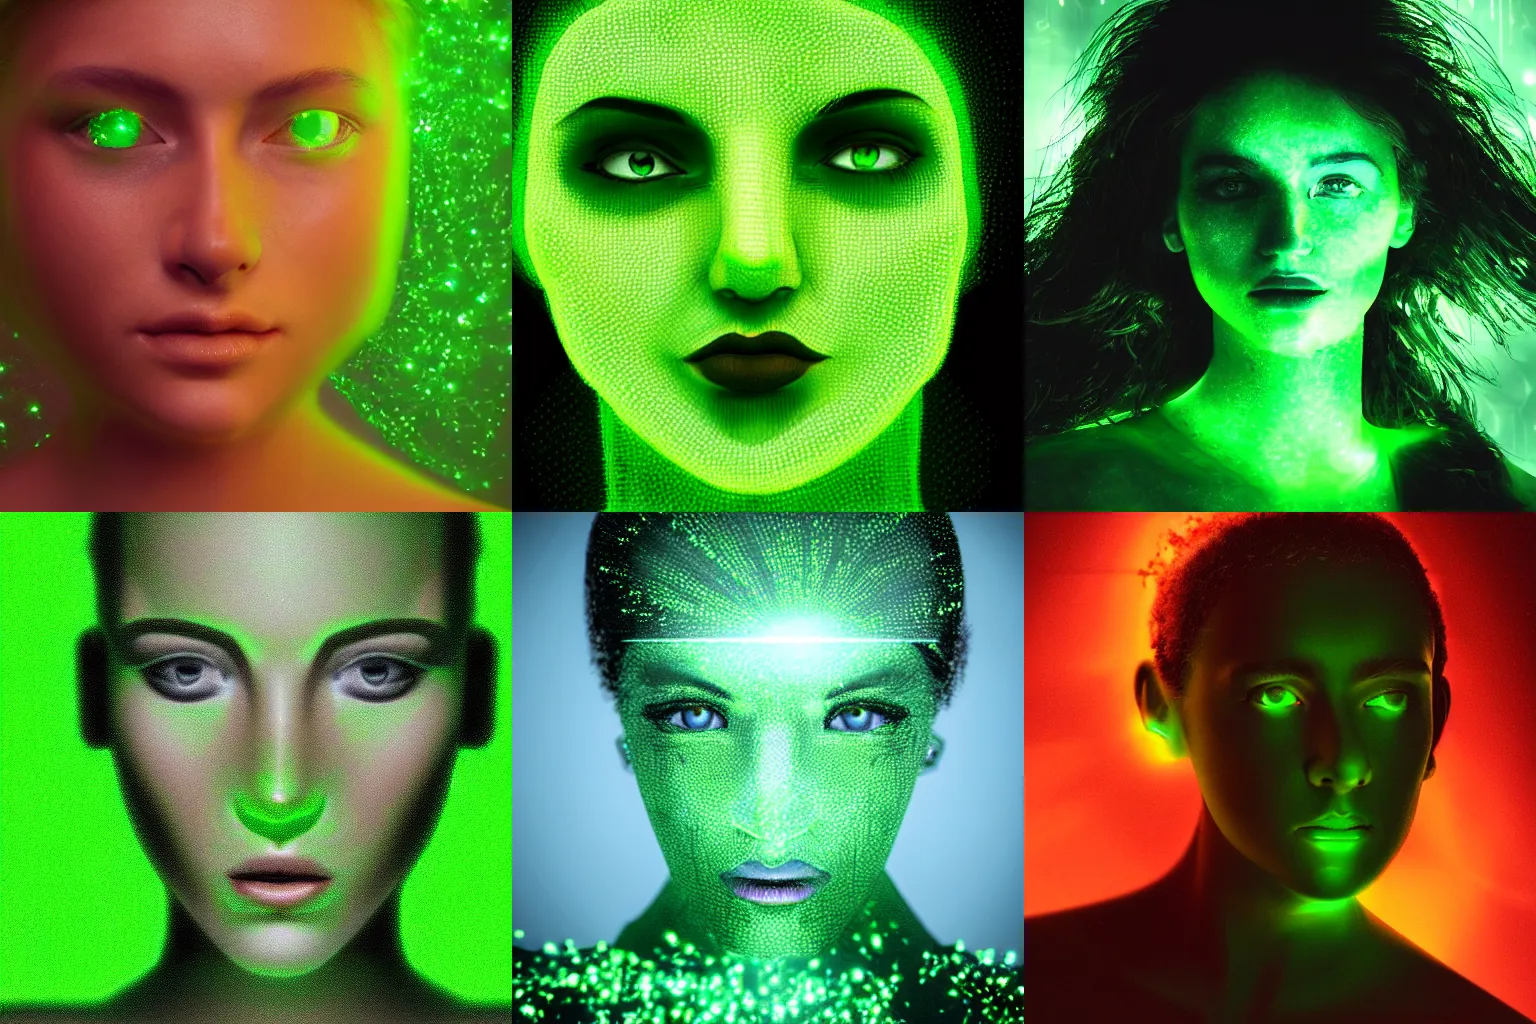 Prompt: closeup portrait of an ethereal person made of green light, divine, cyberspace, mysterious, dark high-contrast concept art